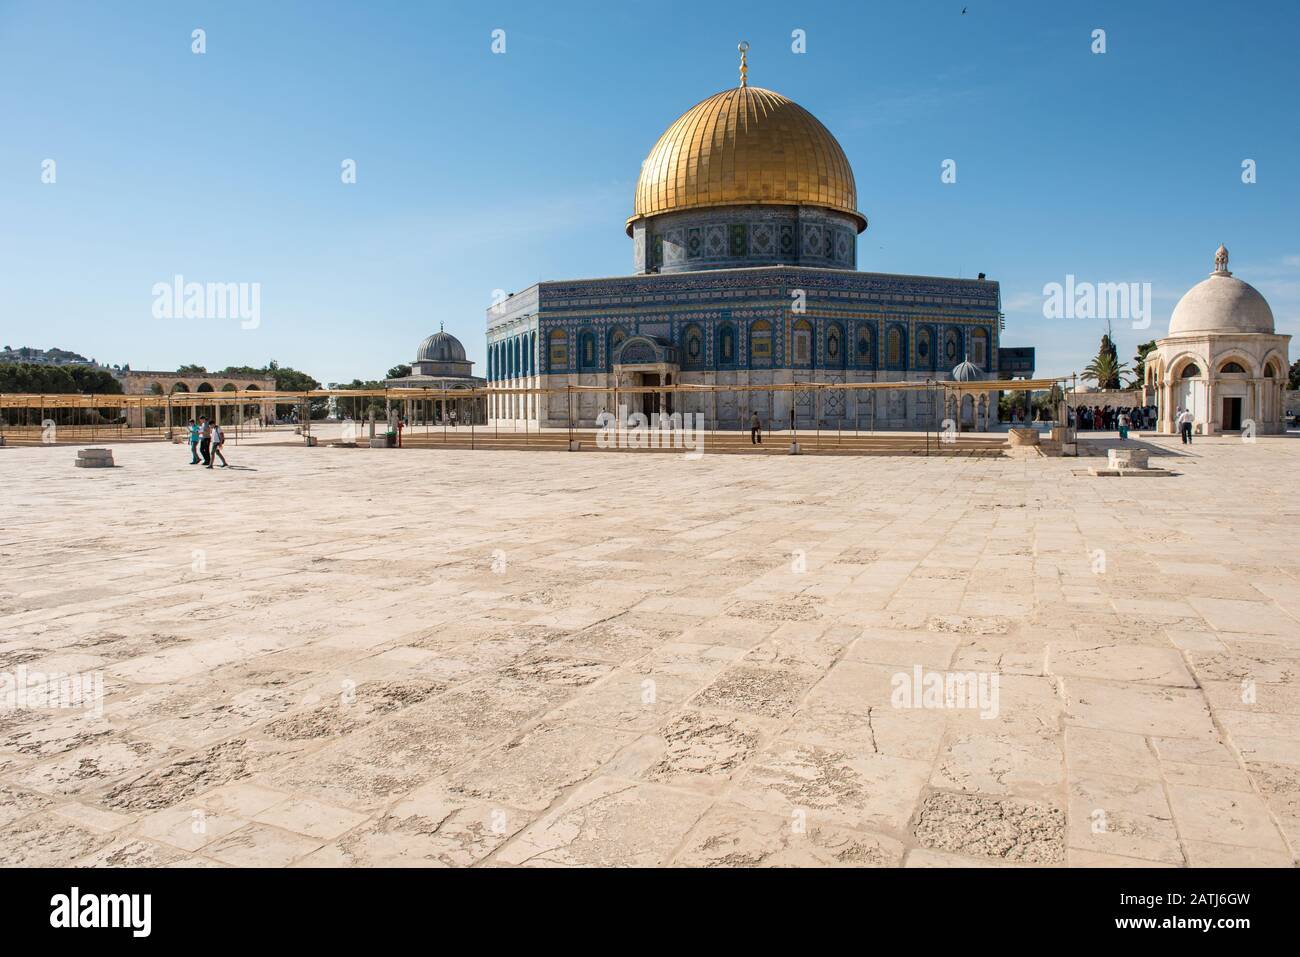 JERUSALEM, ISRAEL - MAY 16, 2018: Non muslim tourists visiting the Dome of the Rock Islamic Shrine on the Temple Mount in the Old city of Jerusalem, P Stock Photo